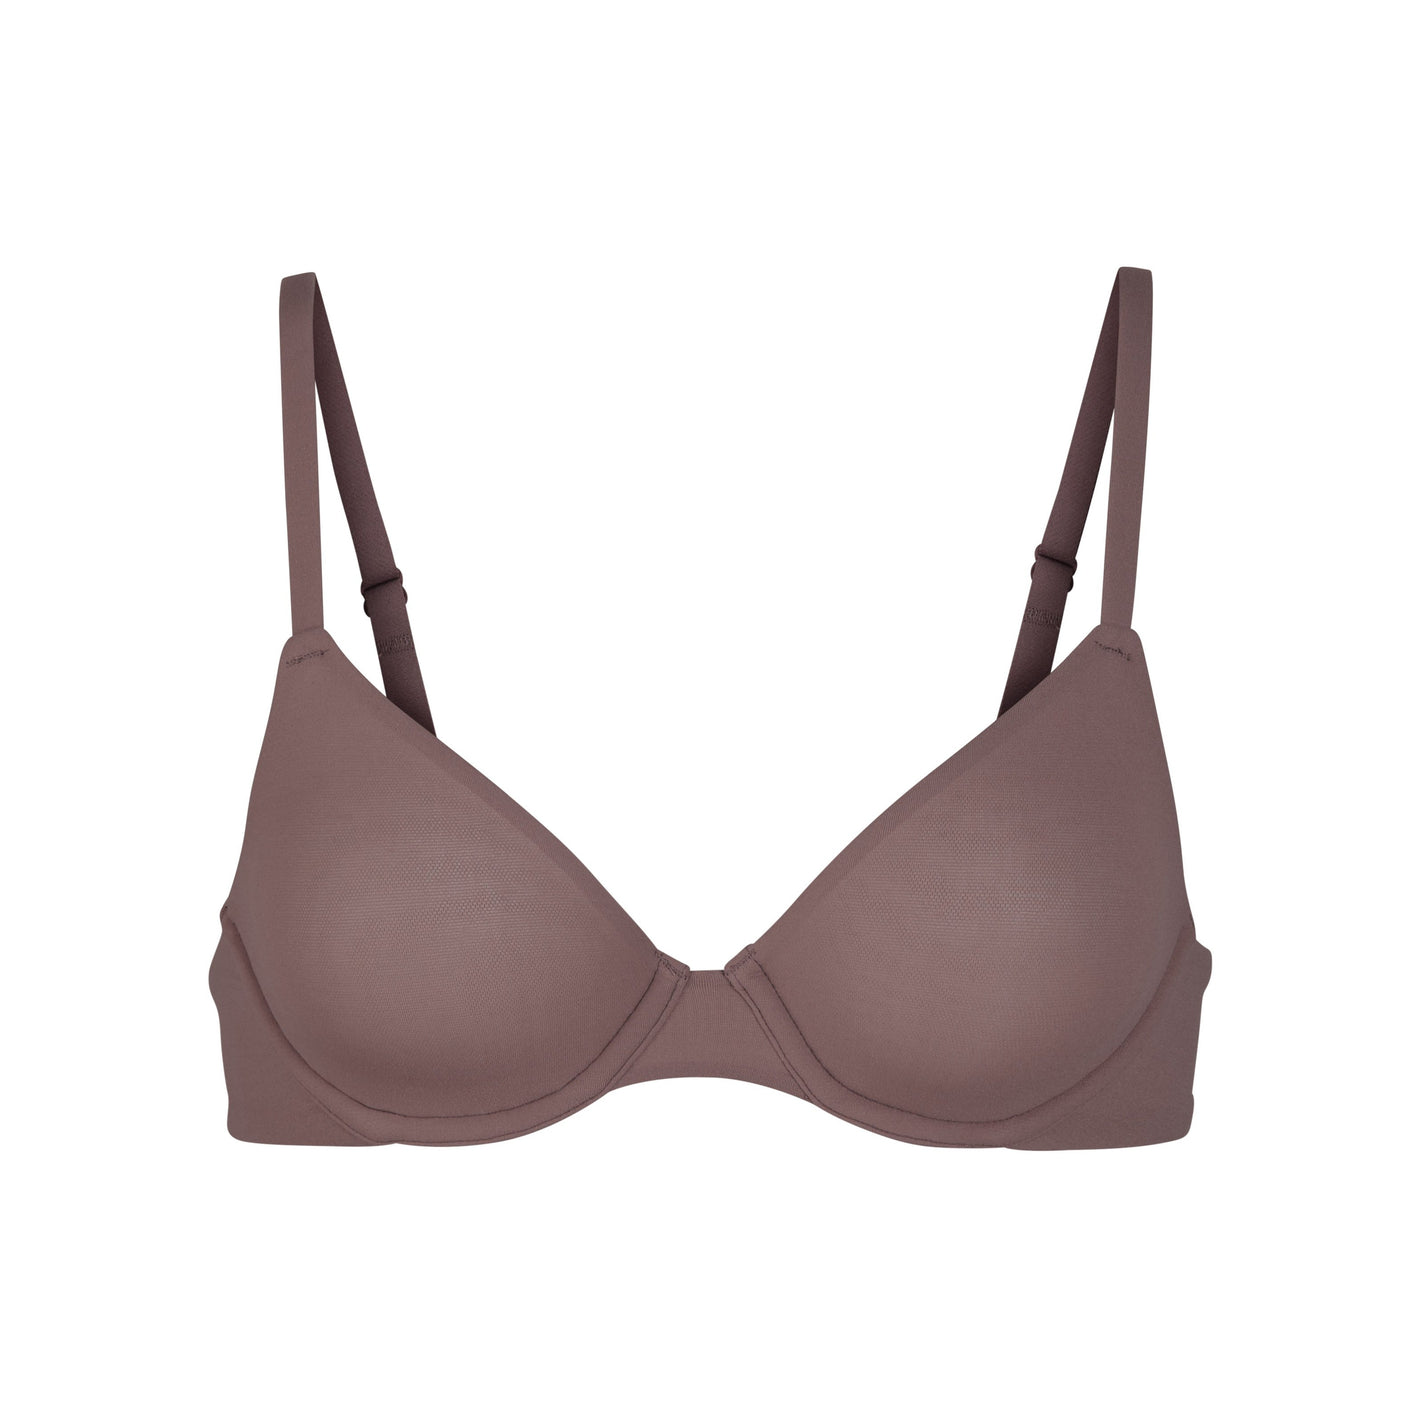 I'm a 36DDD - I found two 'Holy Grail bras' including a Skims find that's  'the most supportive ever